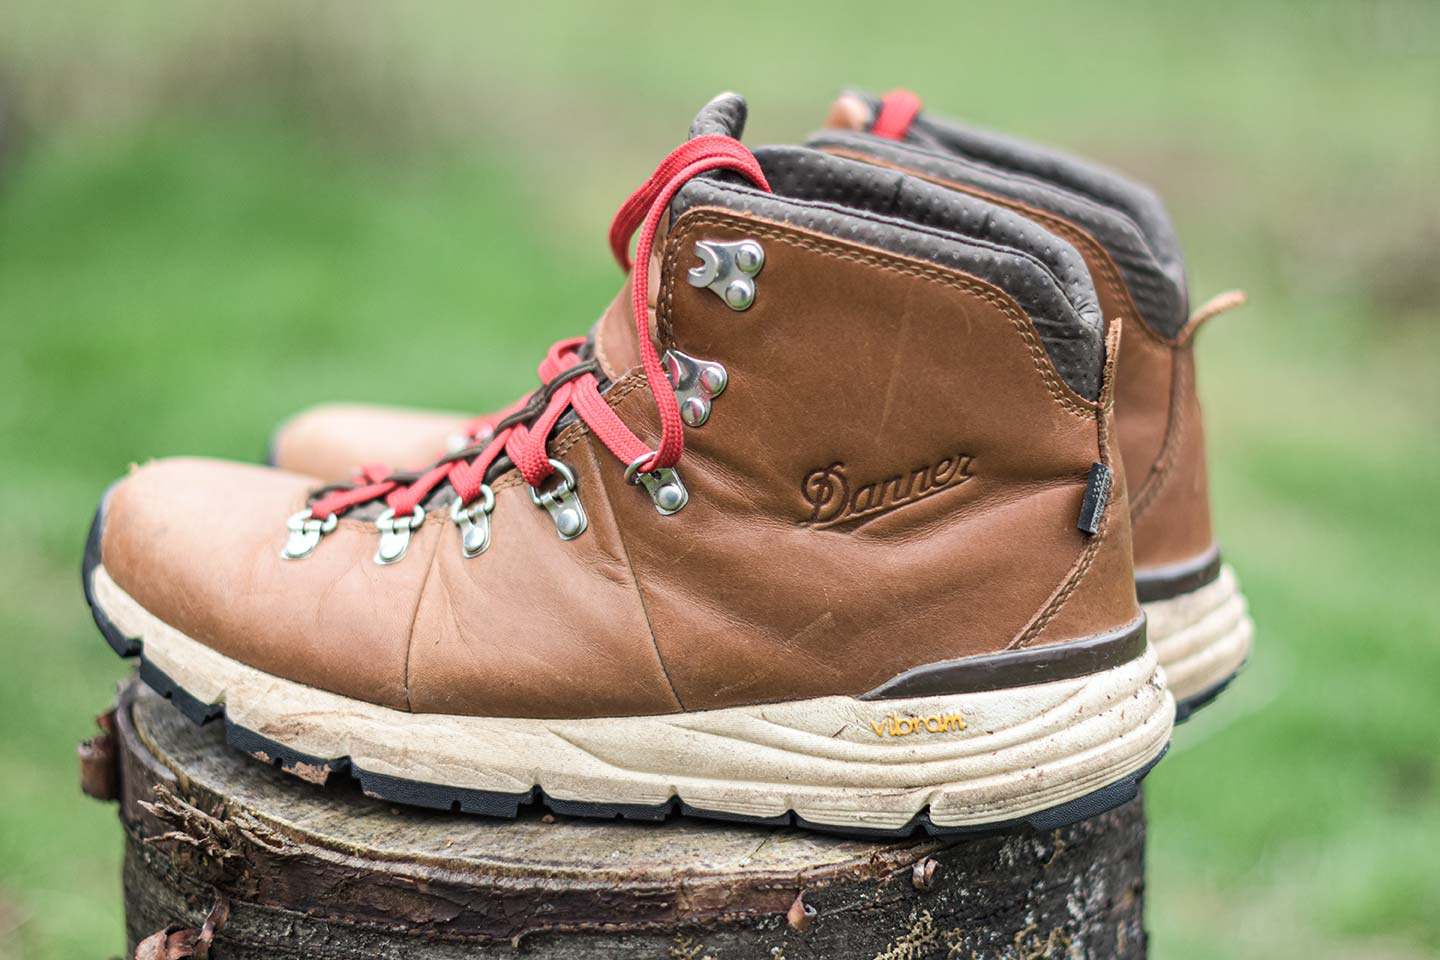 Brown boots with red laces with Danner embossed on the side, and a white sole